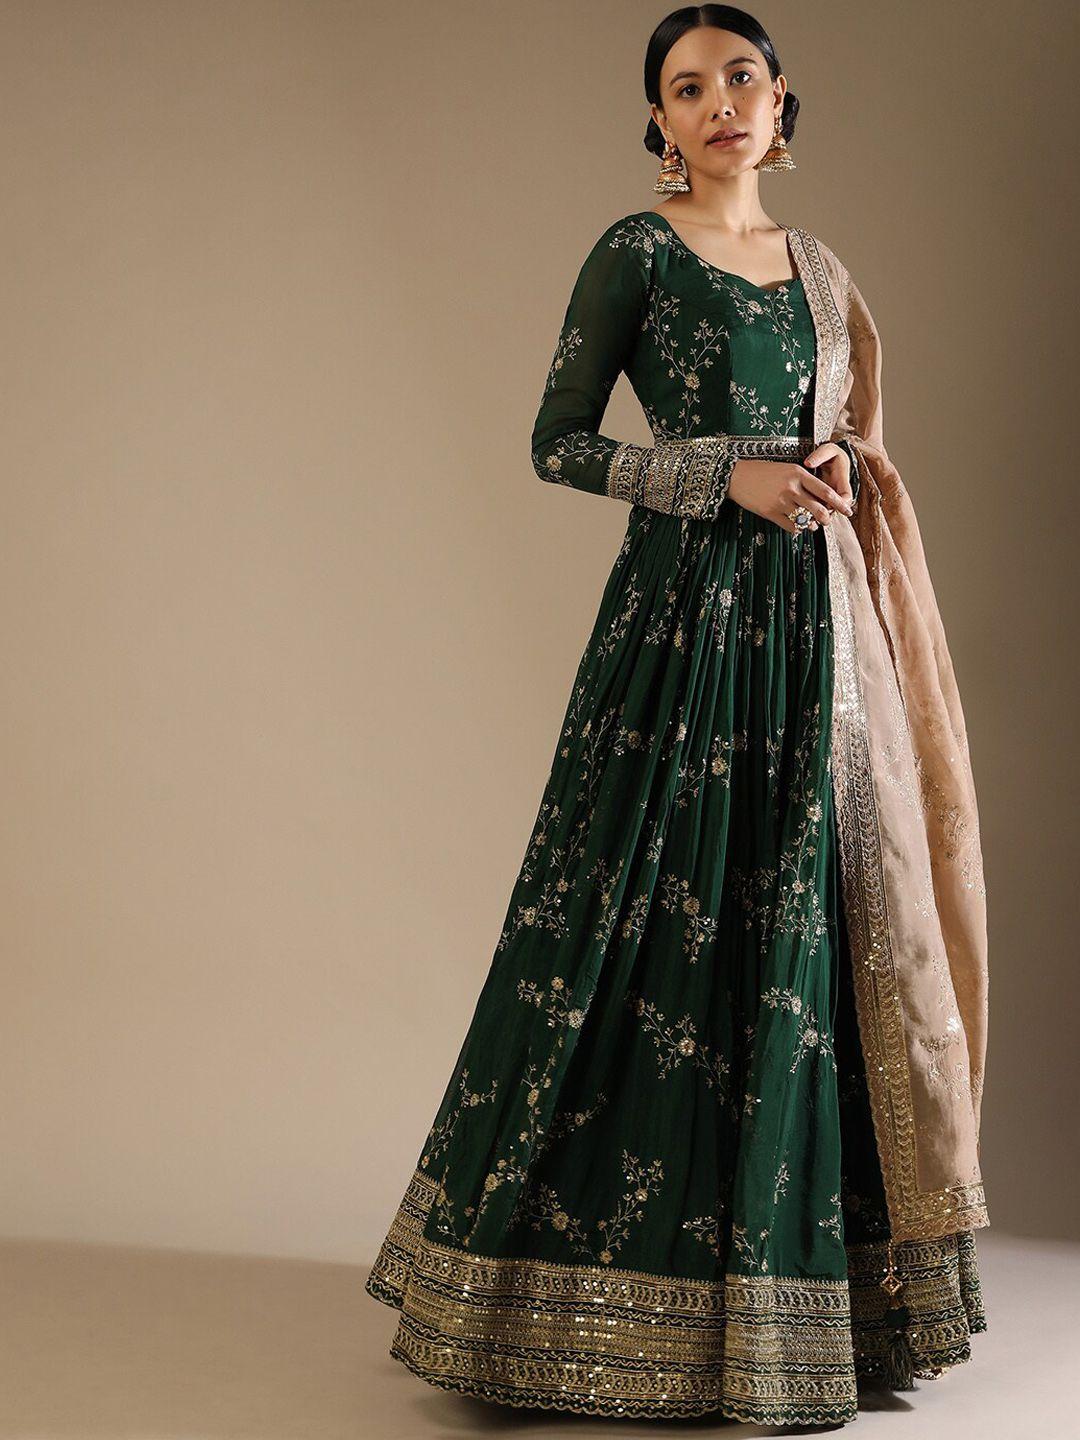 kalki-fashion-ethnic-motifs-embroidered-a-line-sequinned-ethnic-dress